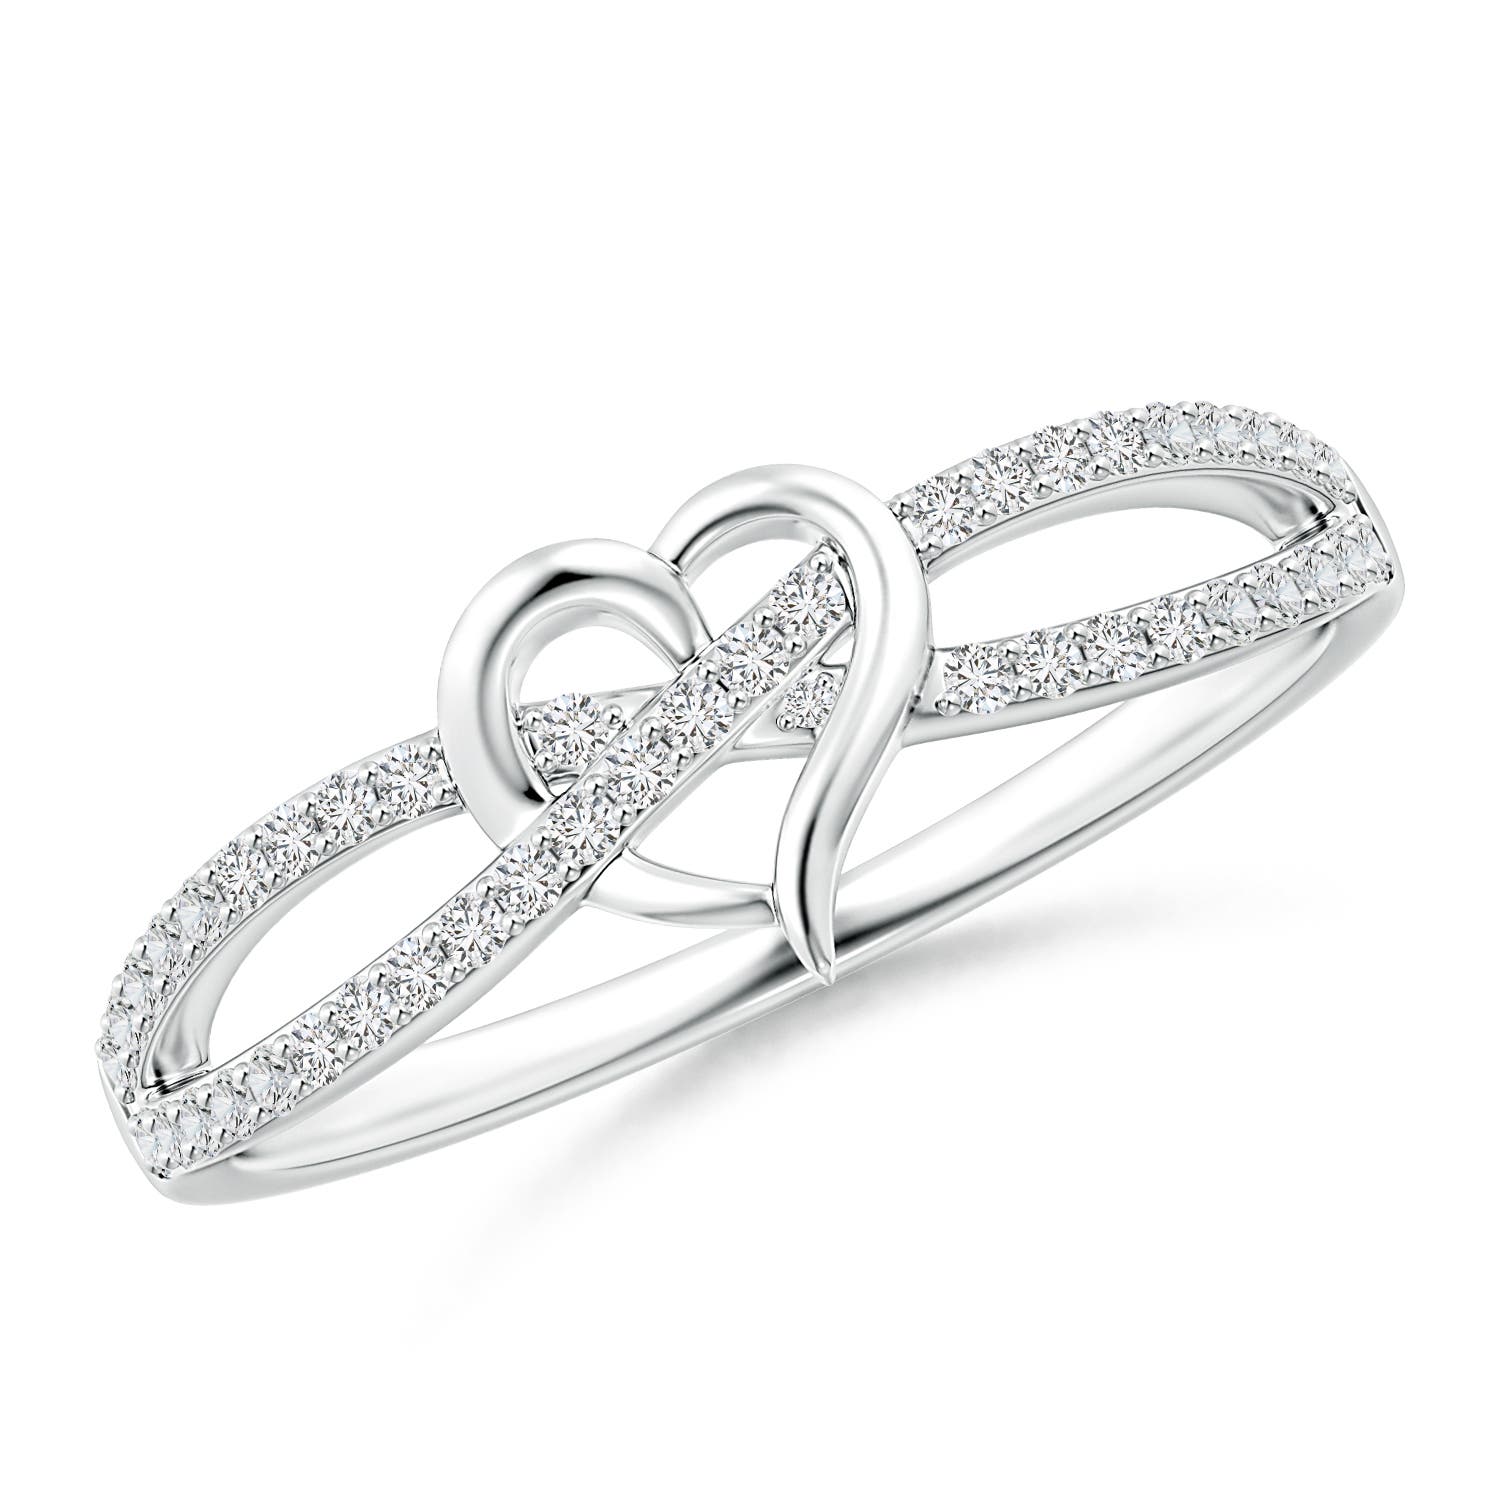 H, SI2 / 0.22 CT / 14 KT White Gold